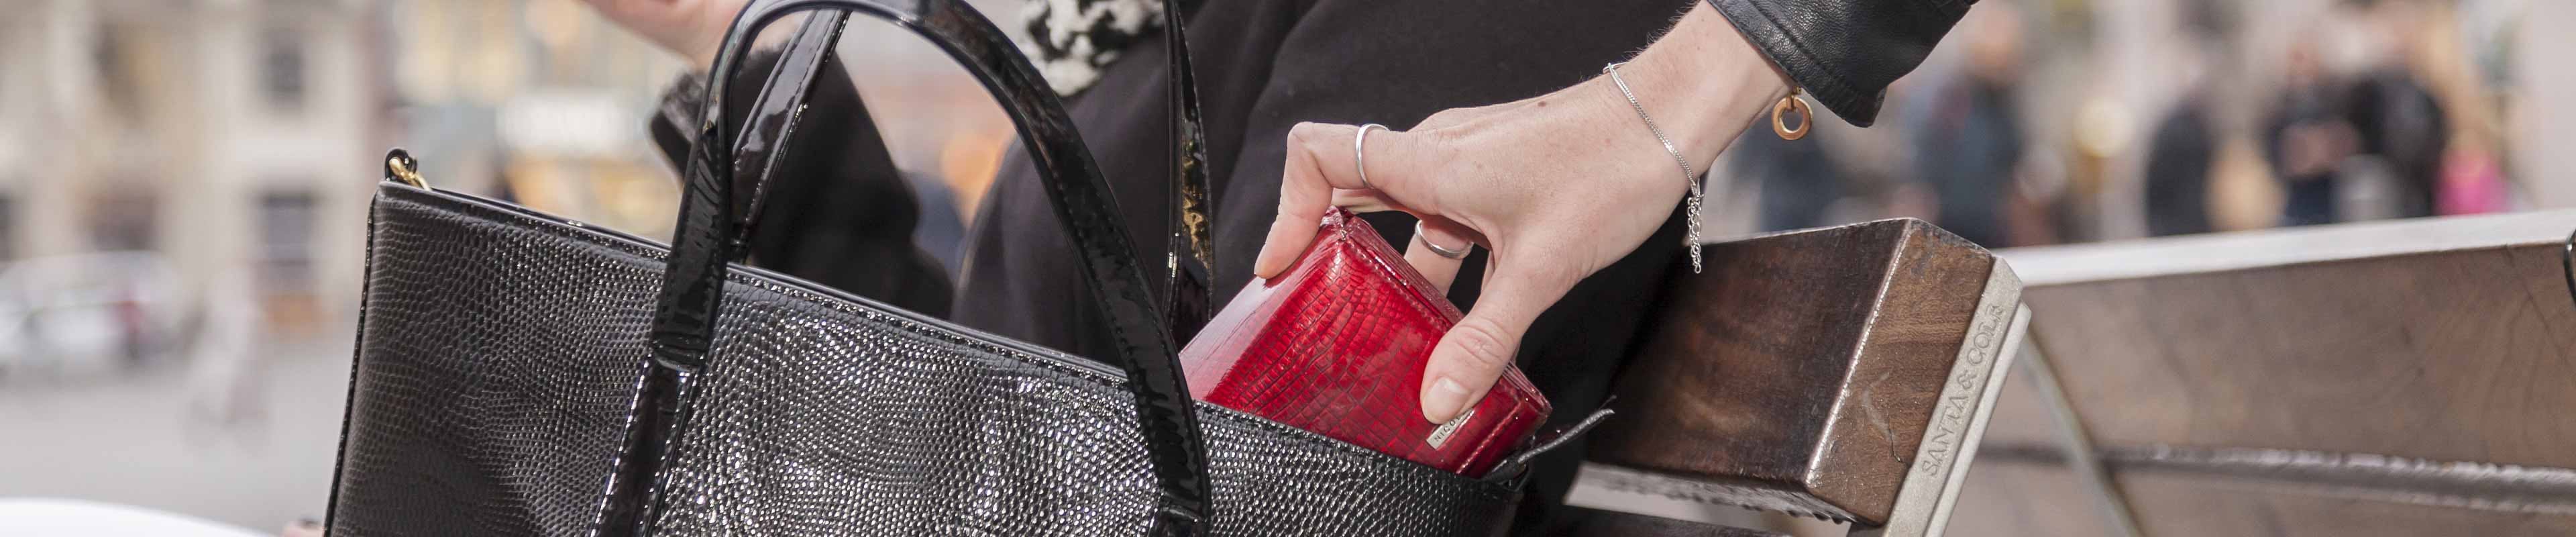 Purse on bench with woman stealing wallet for tax identity theft. 